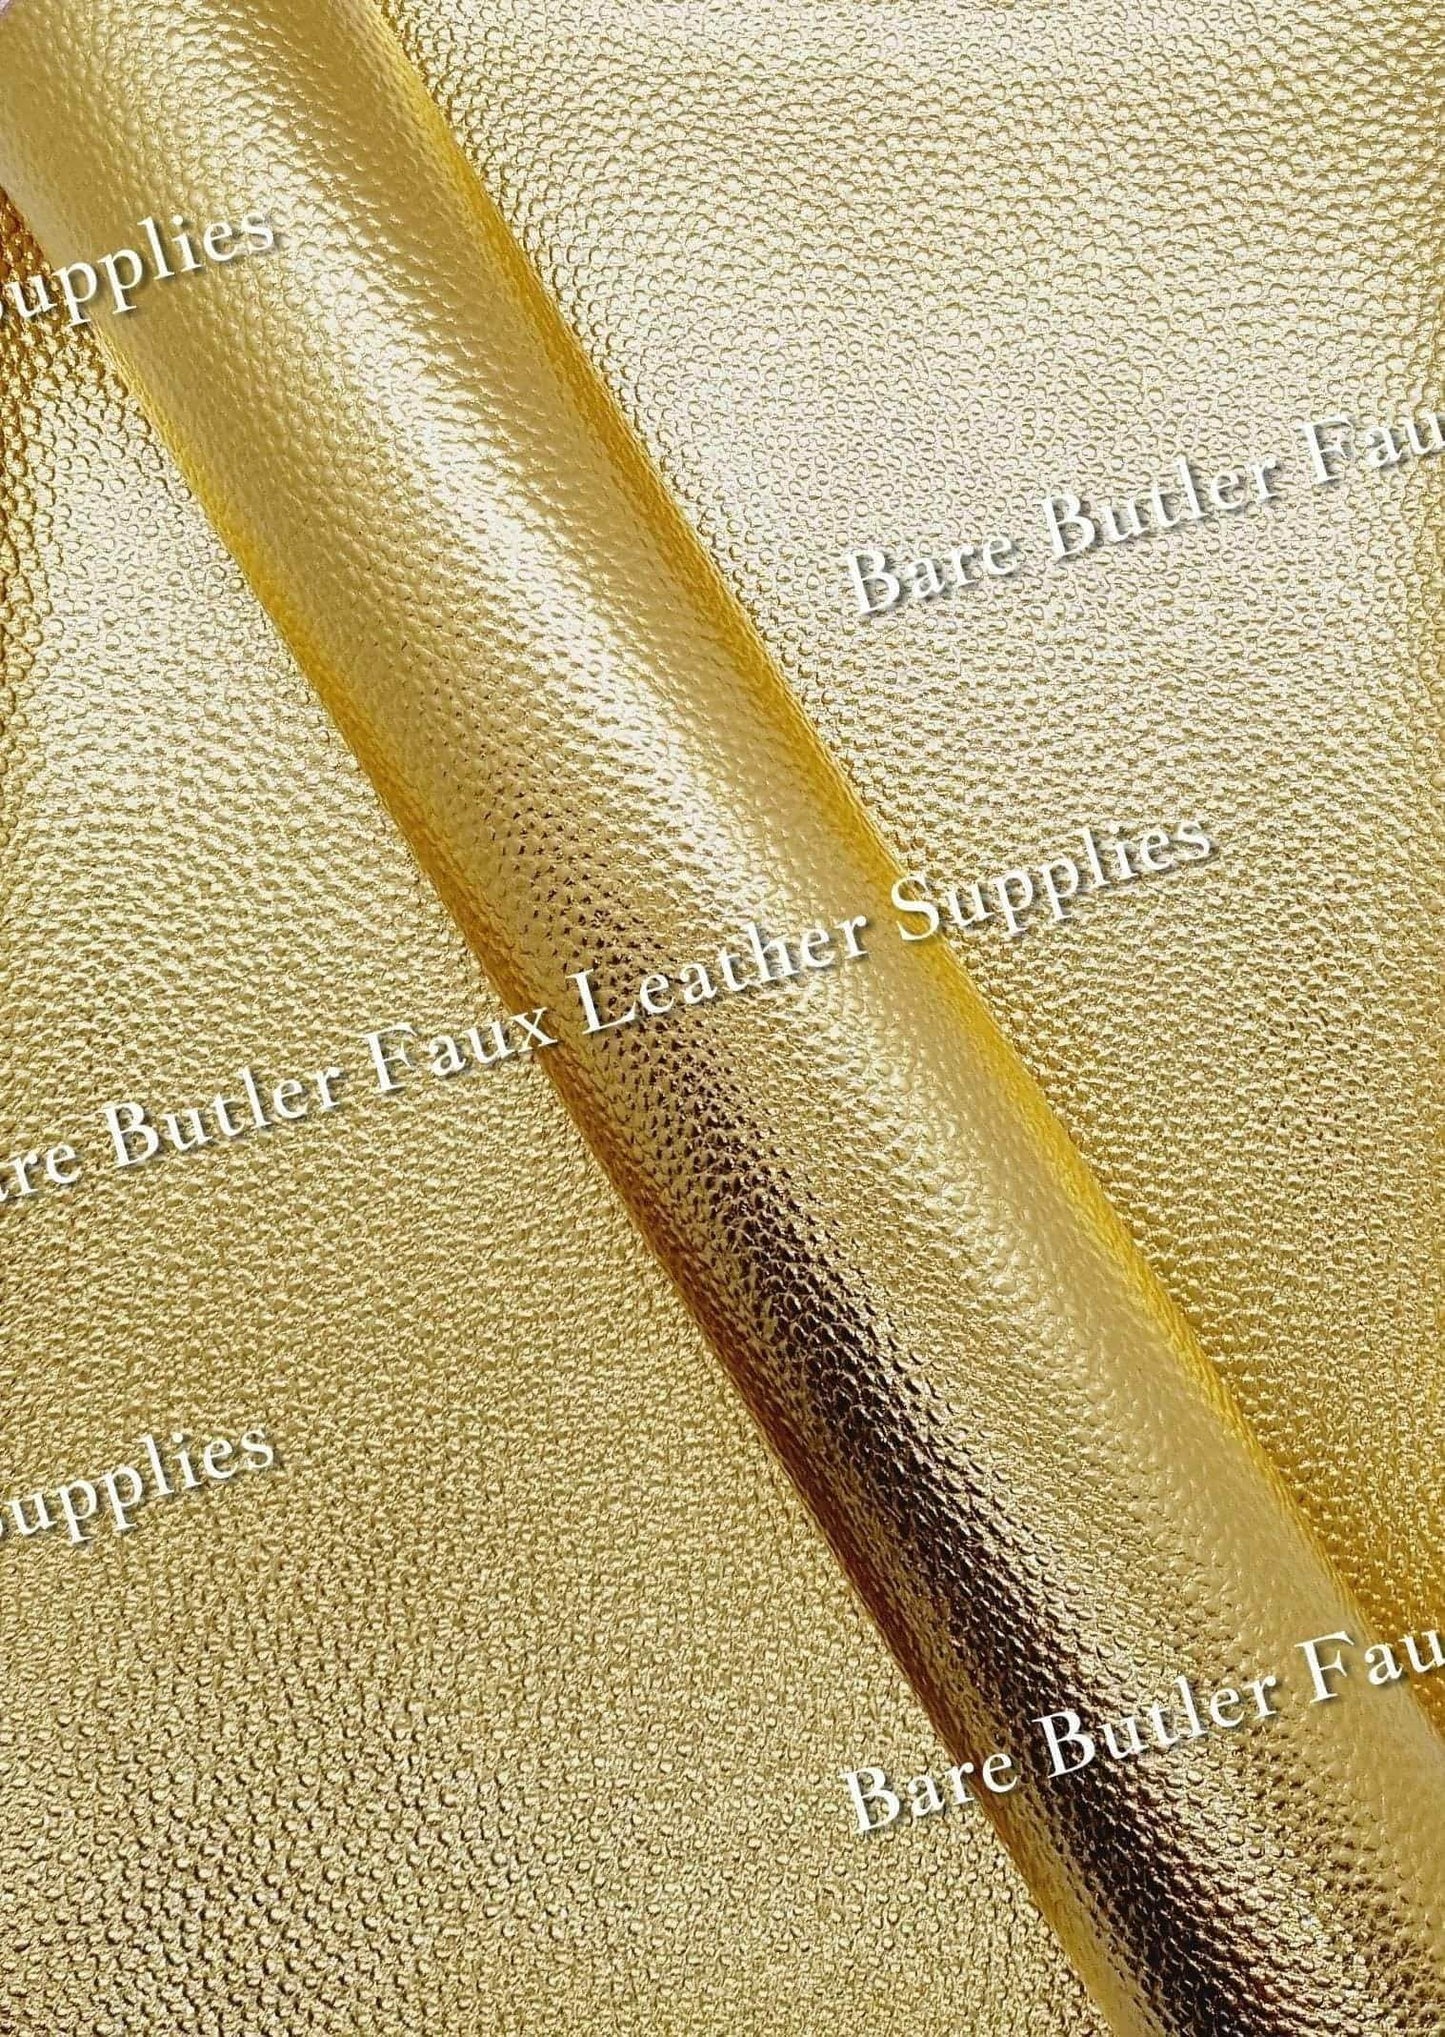 Metallic Yellow - Faux, Faux Leather, Leather, leatherette, metalic, metallic, metallic's - Bare Butler Faux Leather Supplies 